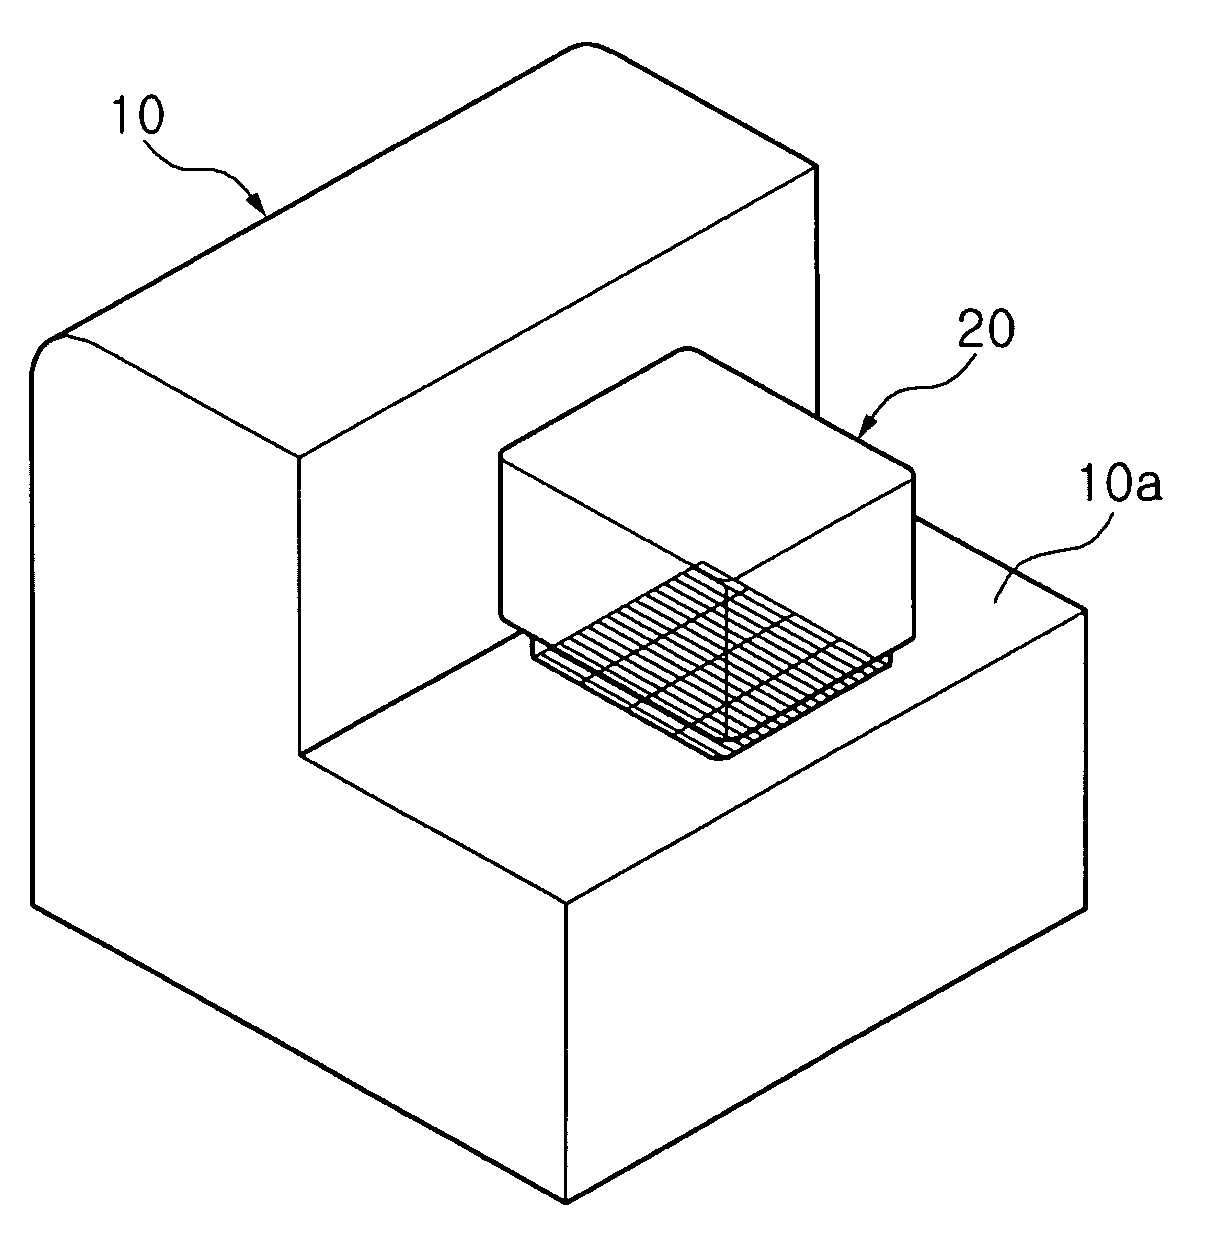 Semiconductor device test apparatus